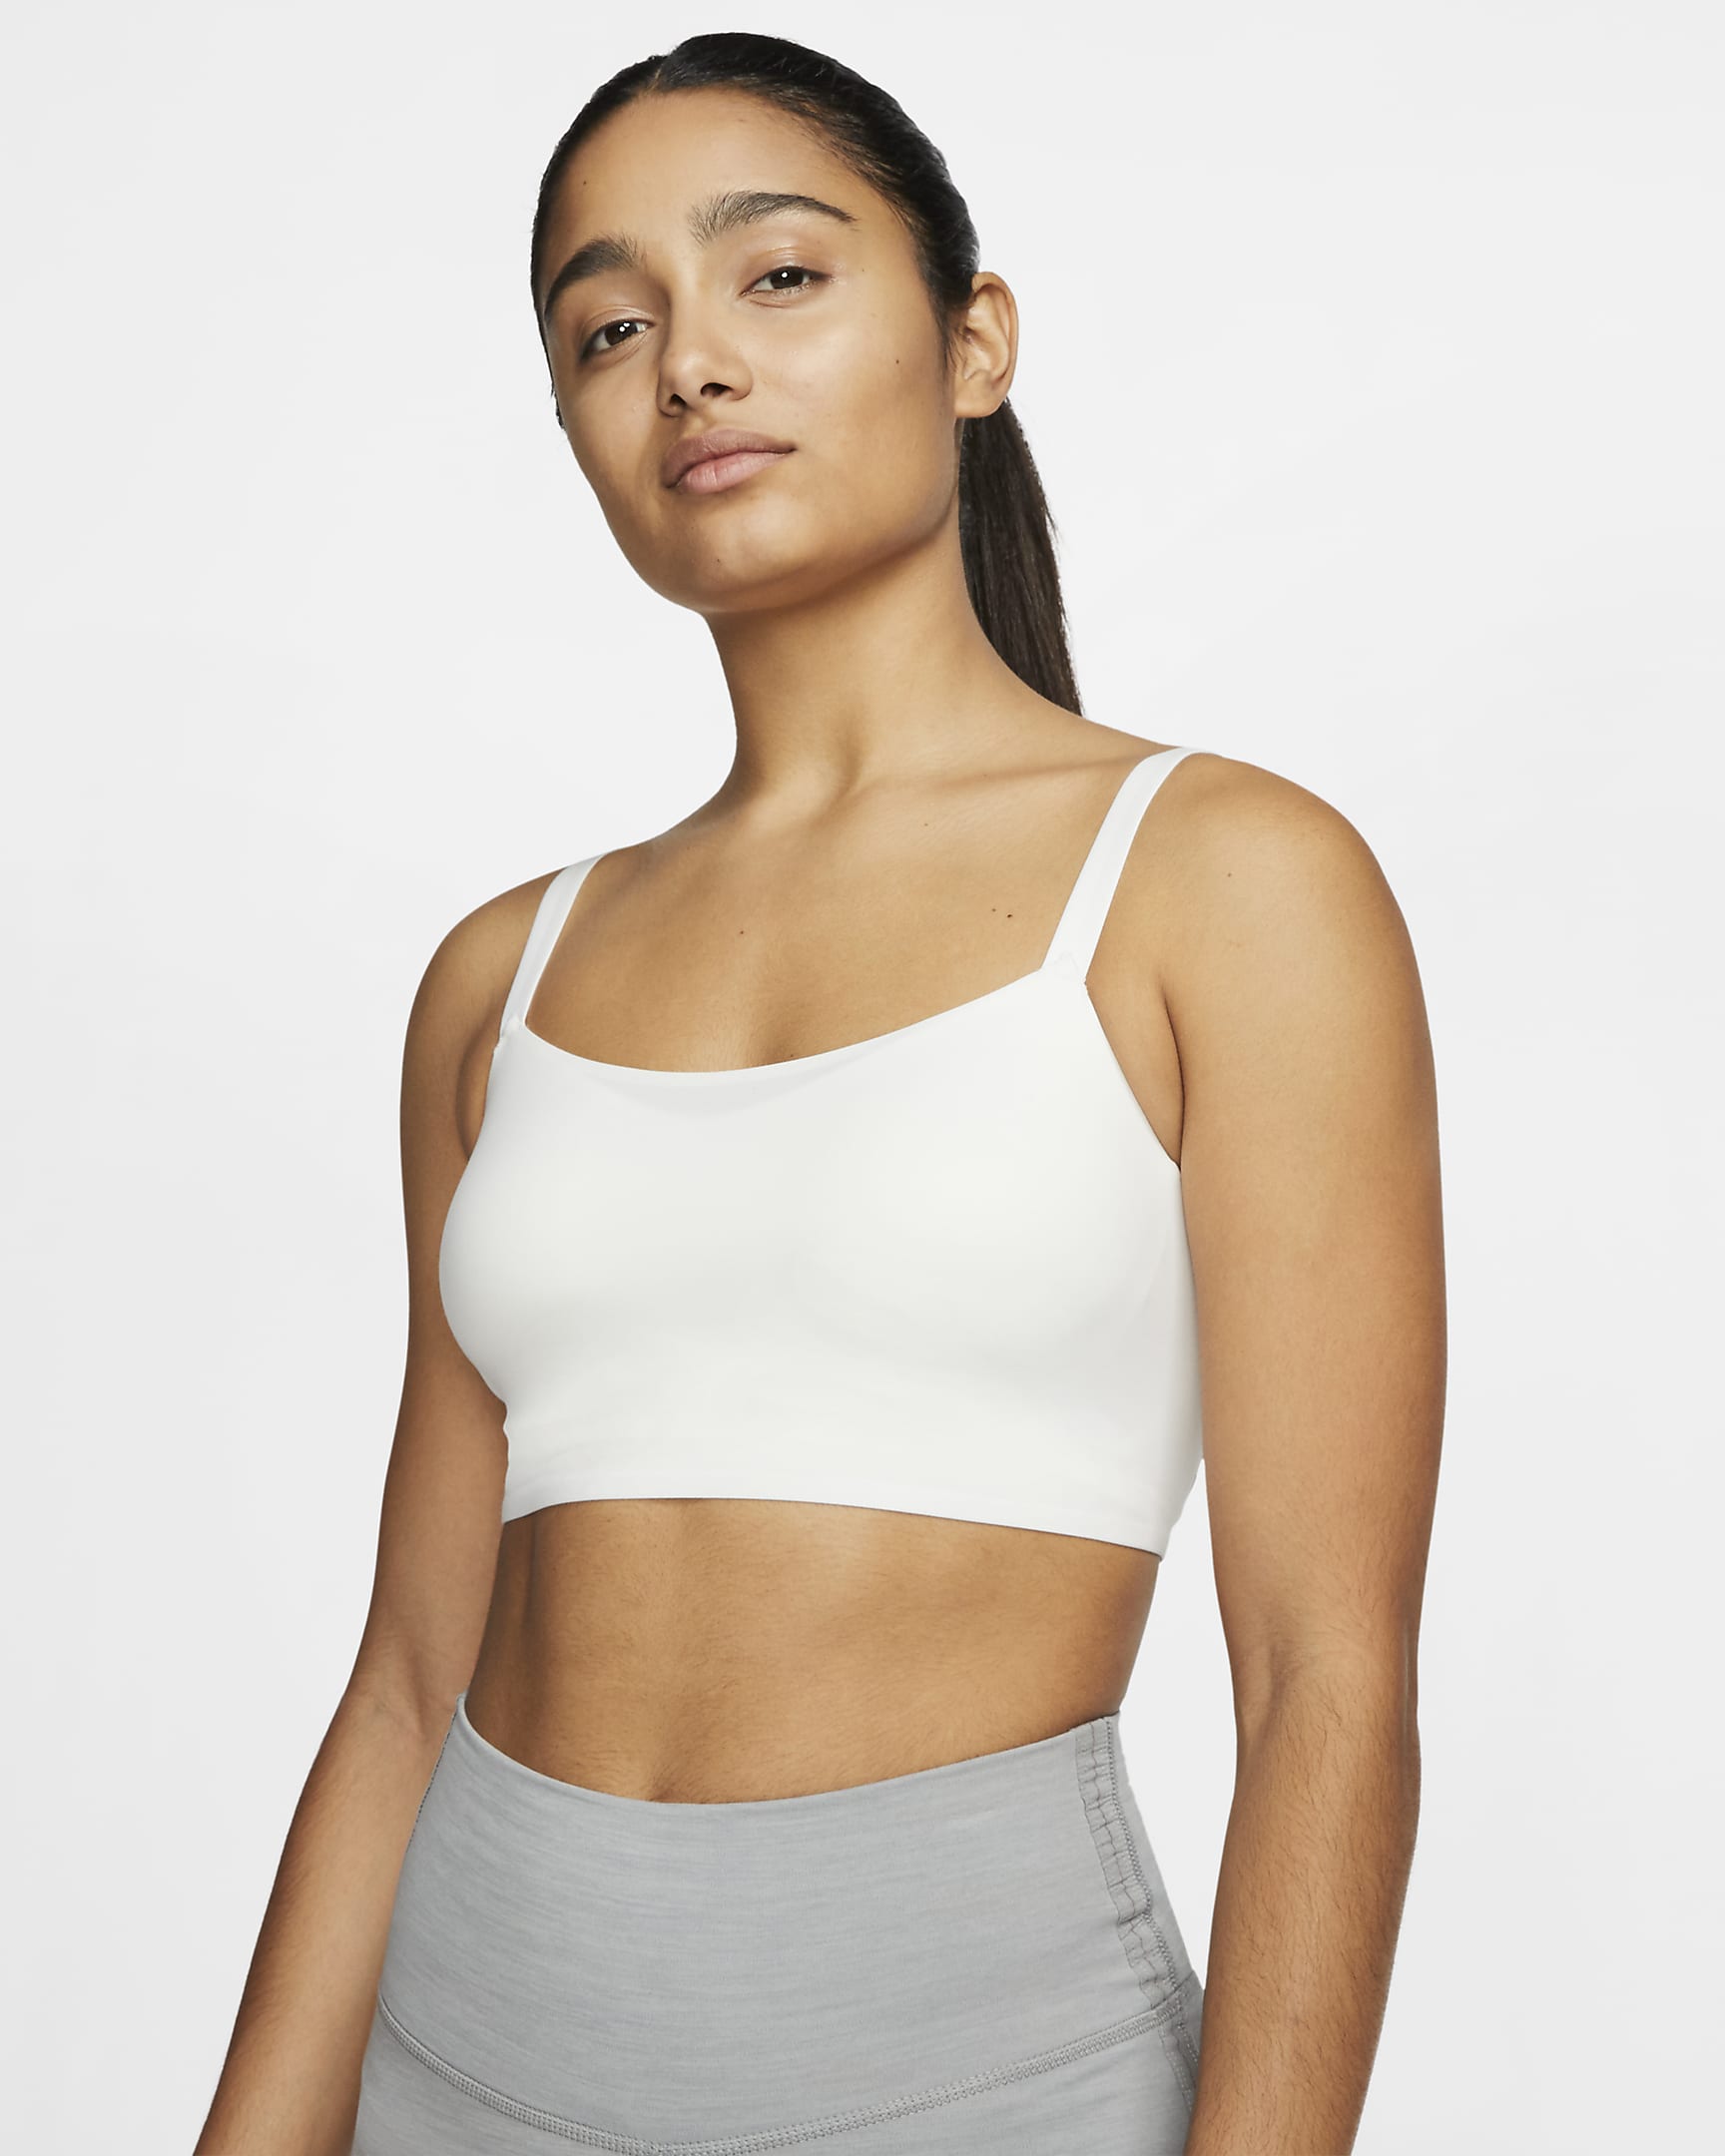 Nike Indy Luxe Women\'s Light-Support 1-Piece Pad Convertible Sports Bra Summit White/Platinum Tint